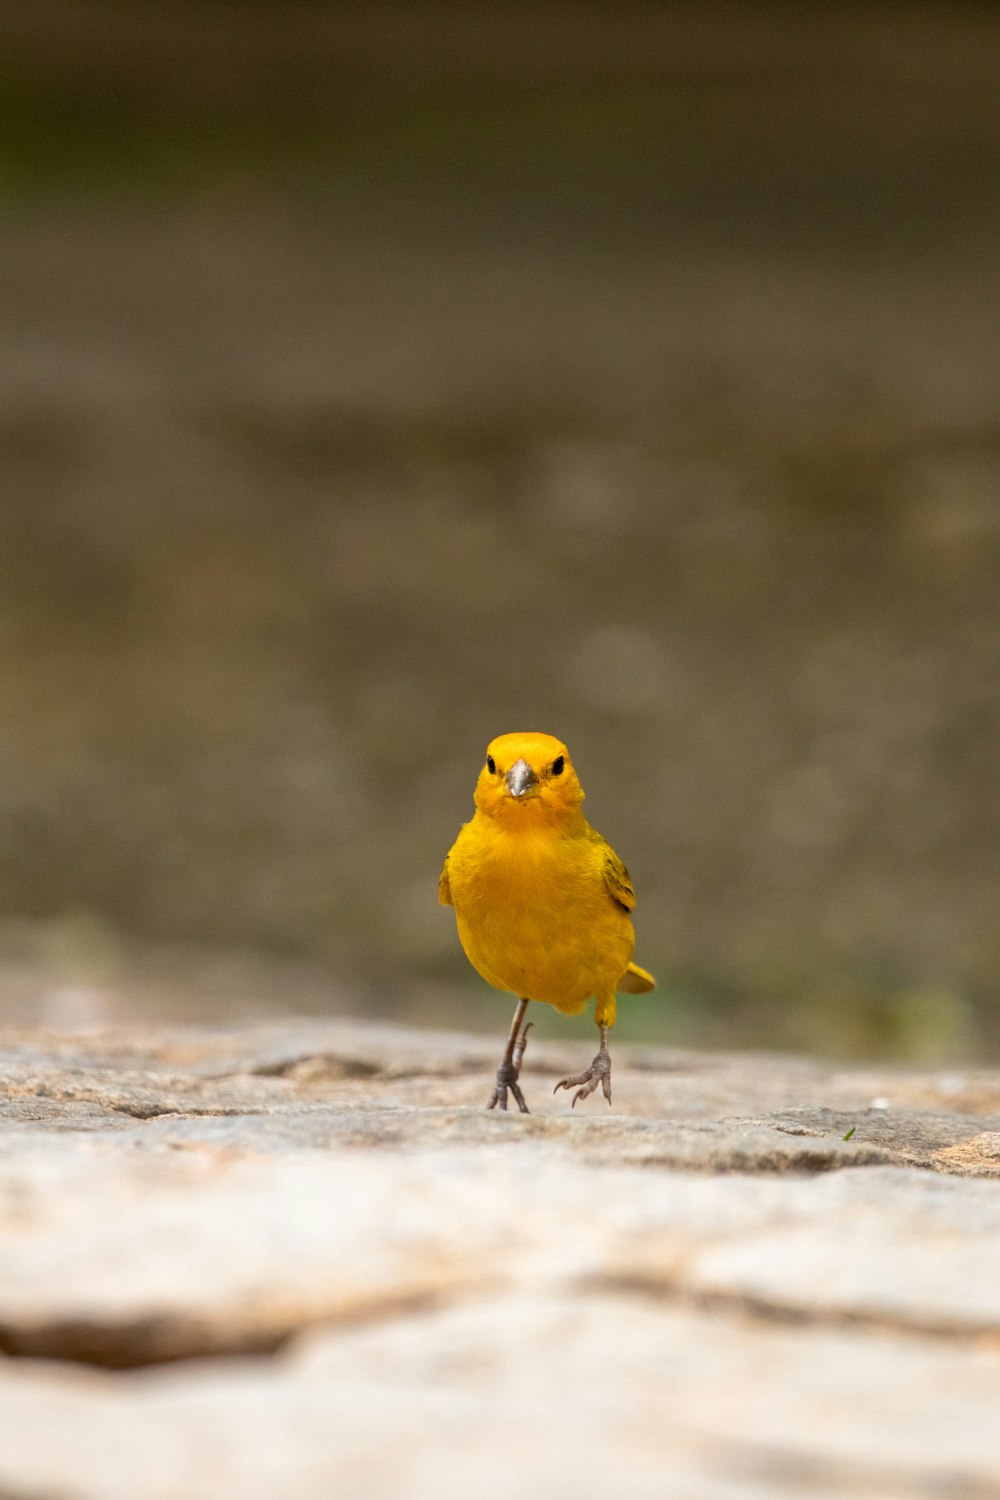 a small yellow bird standing on a rock